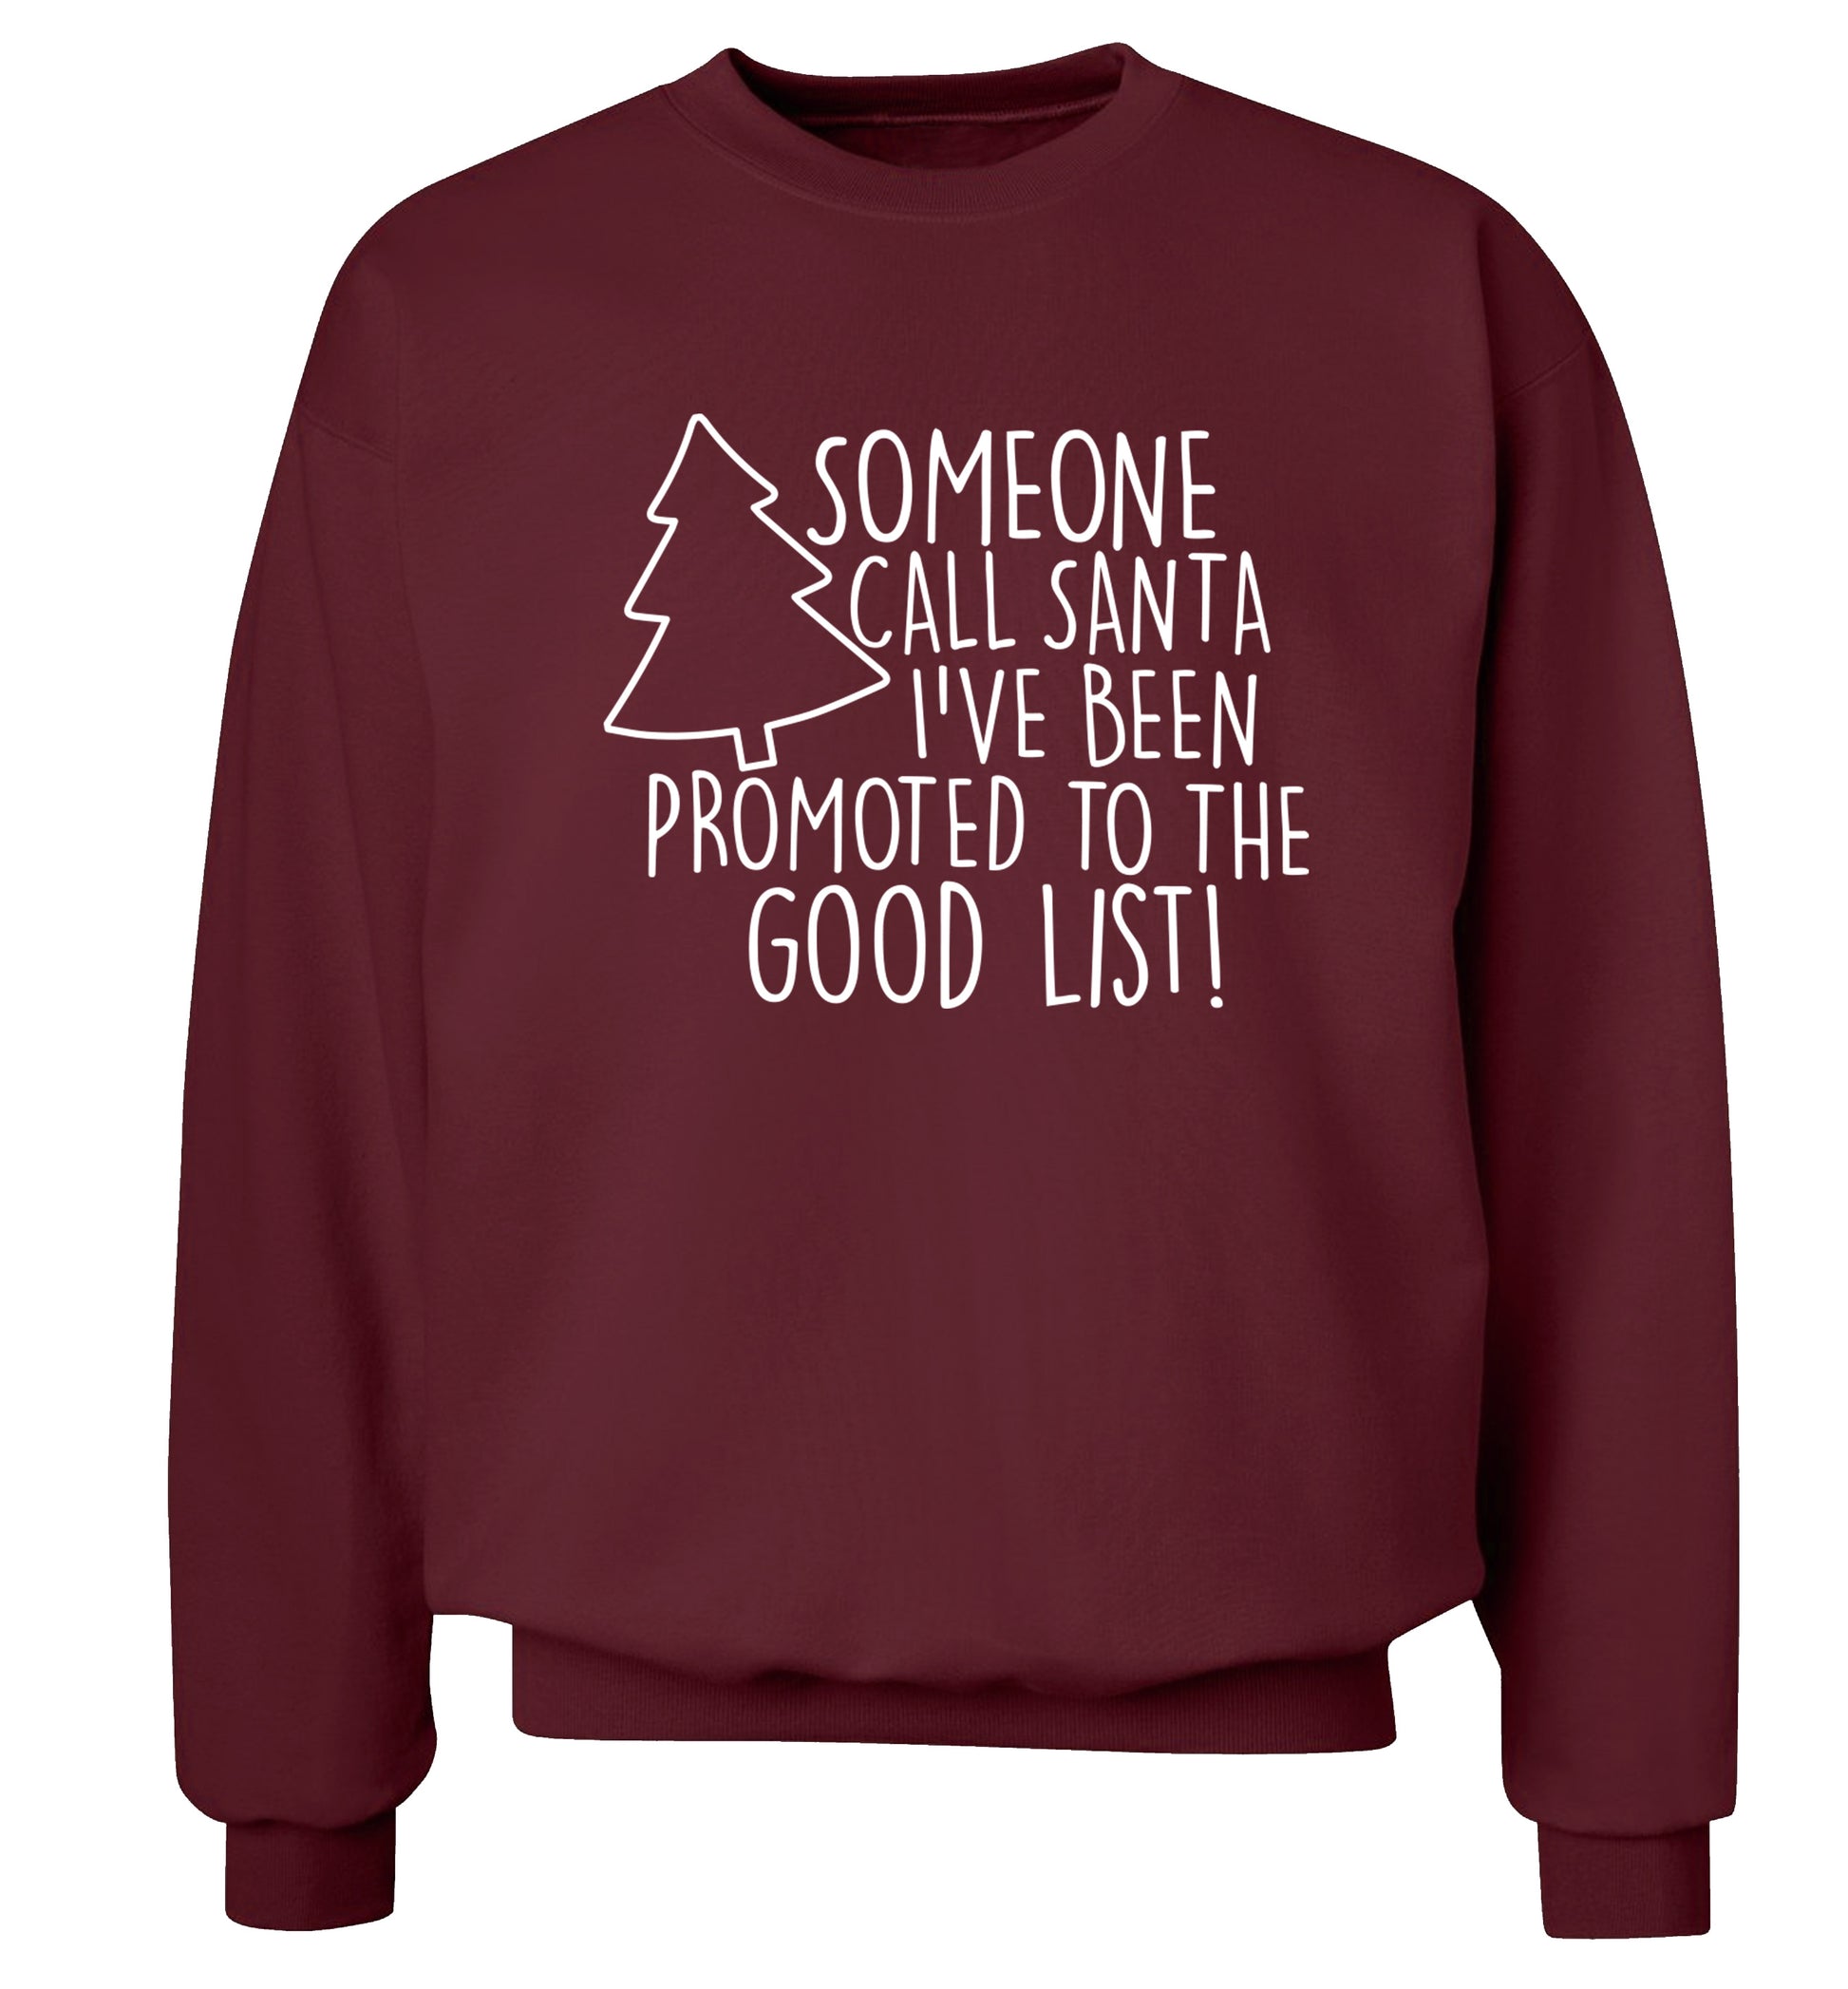 Someone call santa I've been promoted to the good list! Adult's unisex maroon Sweater 2XL